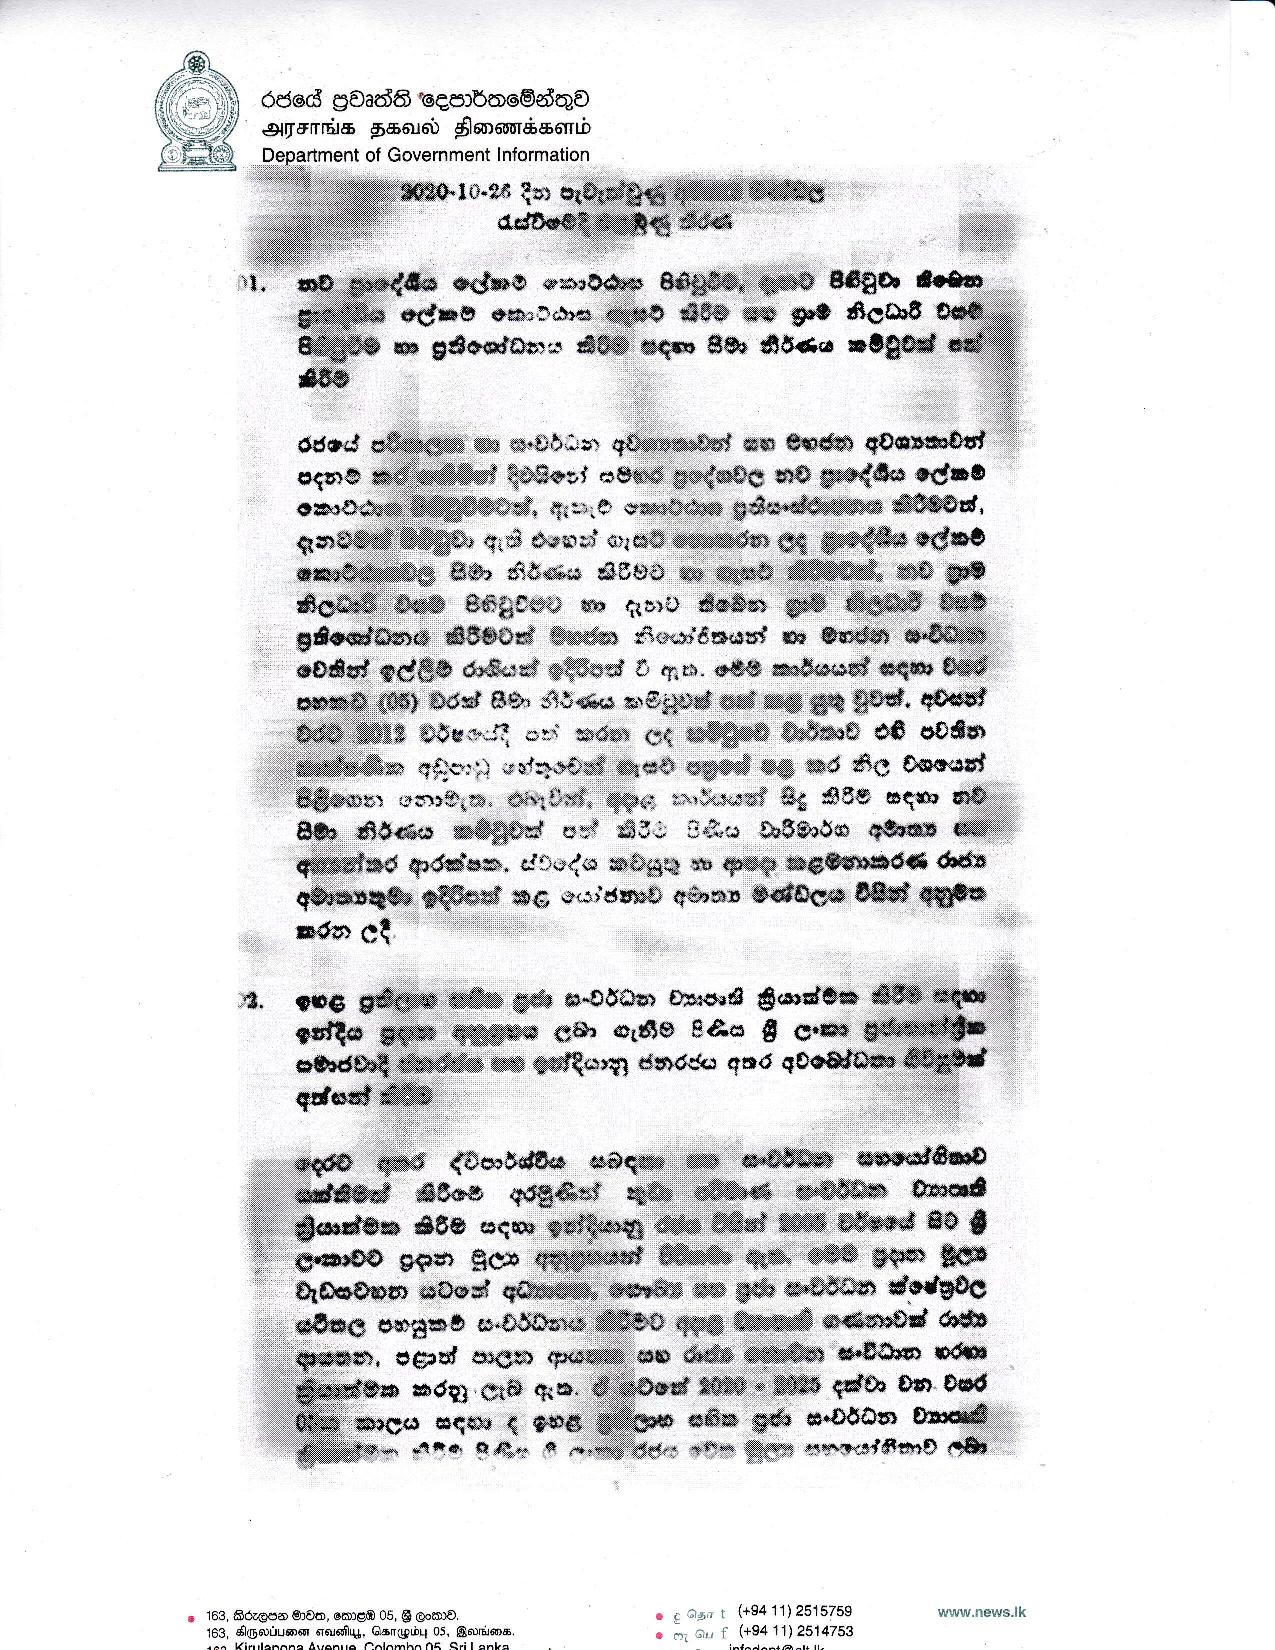 Cabinet Decision on 26.10.2020 page 001